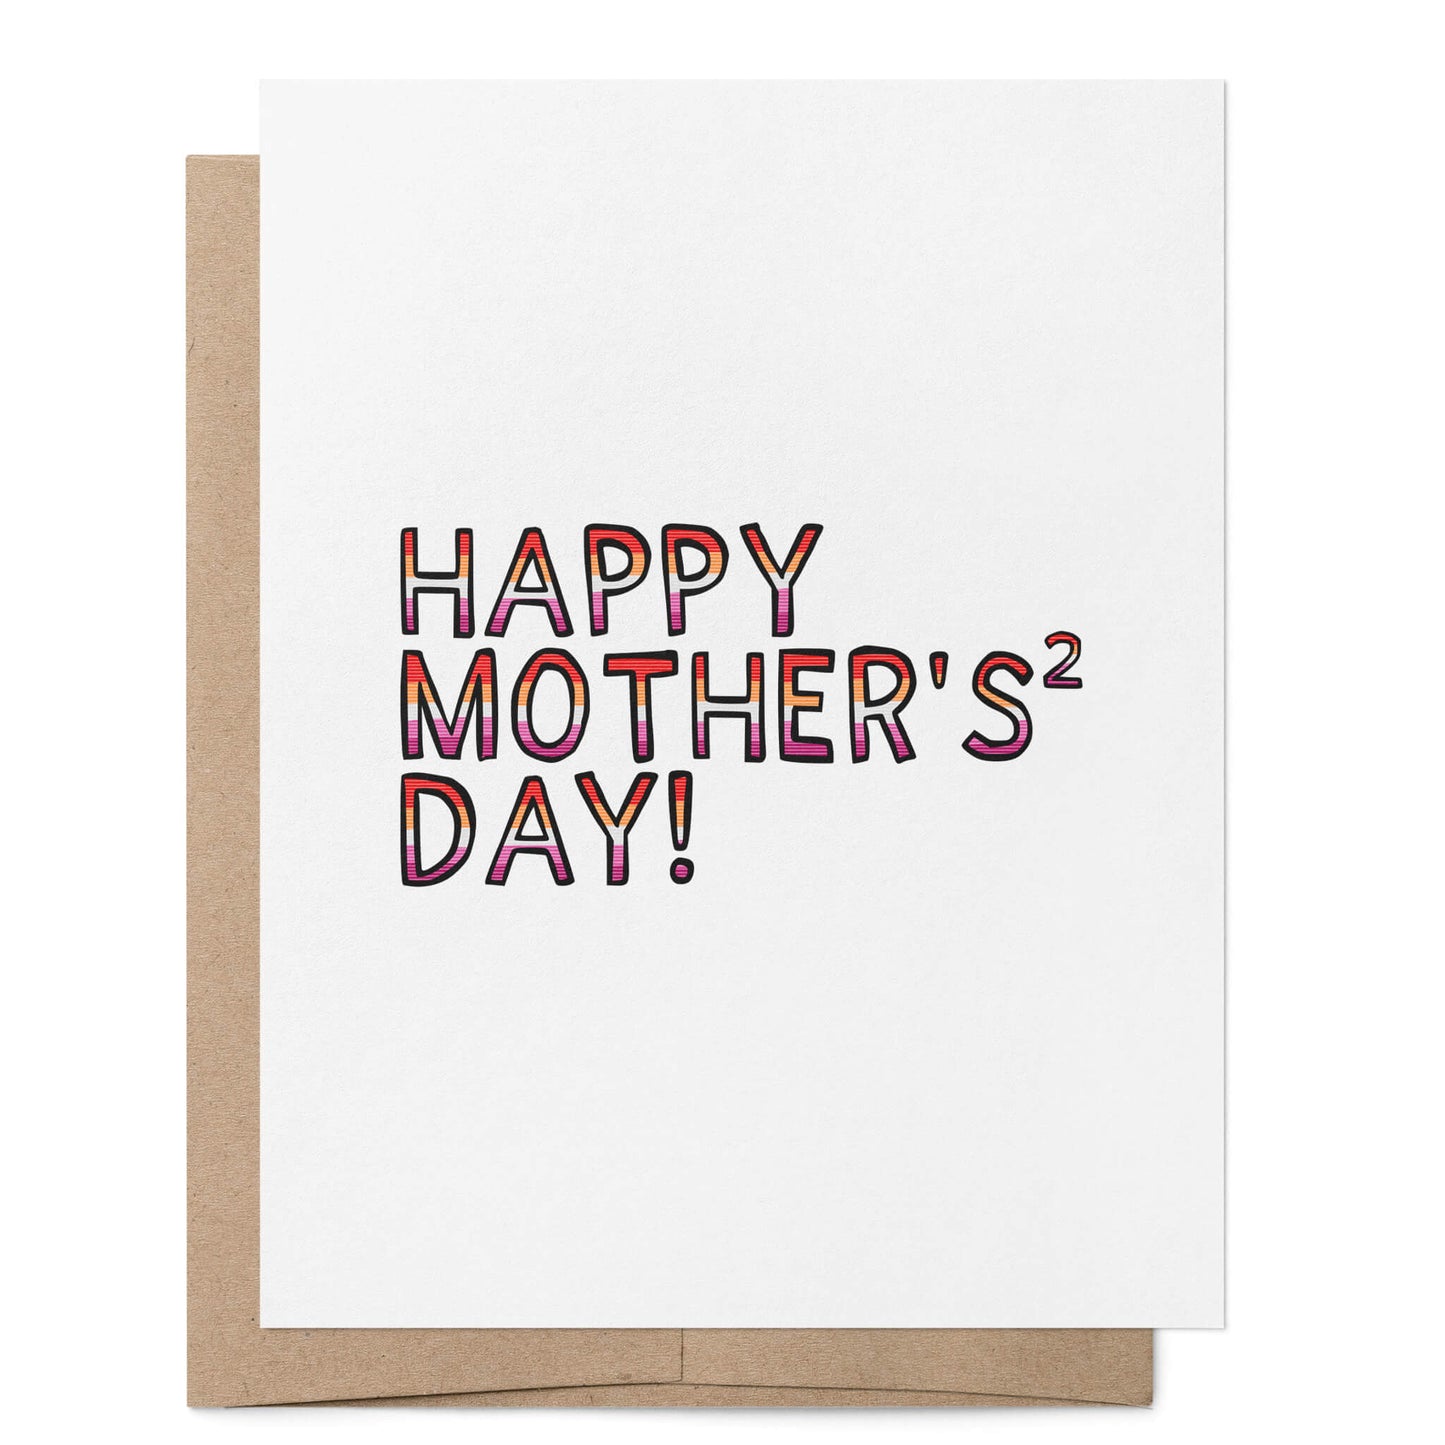 Happy Mother's (squared) Day Card